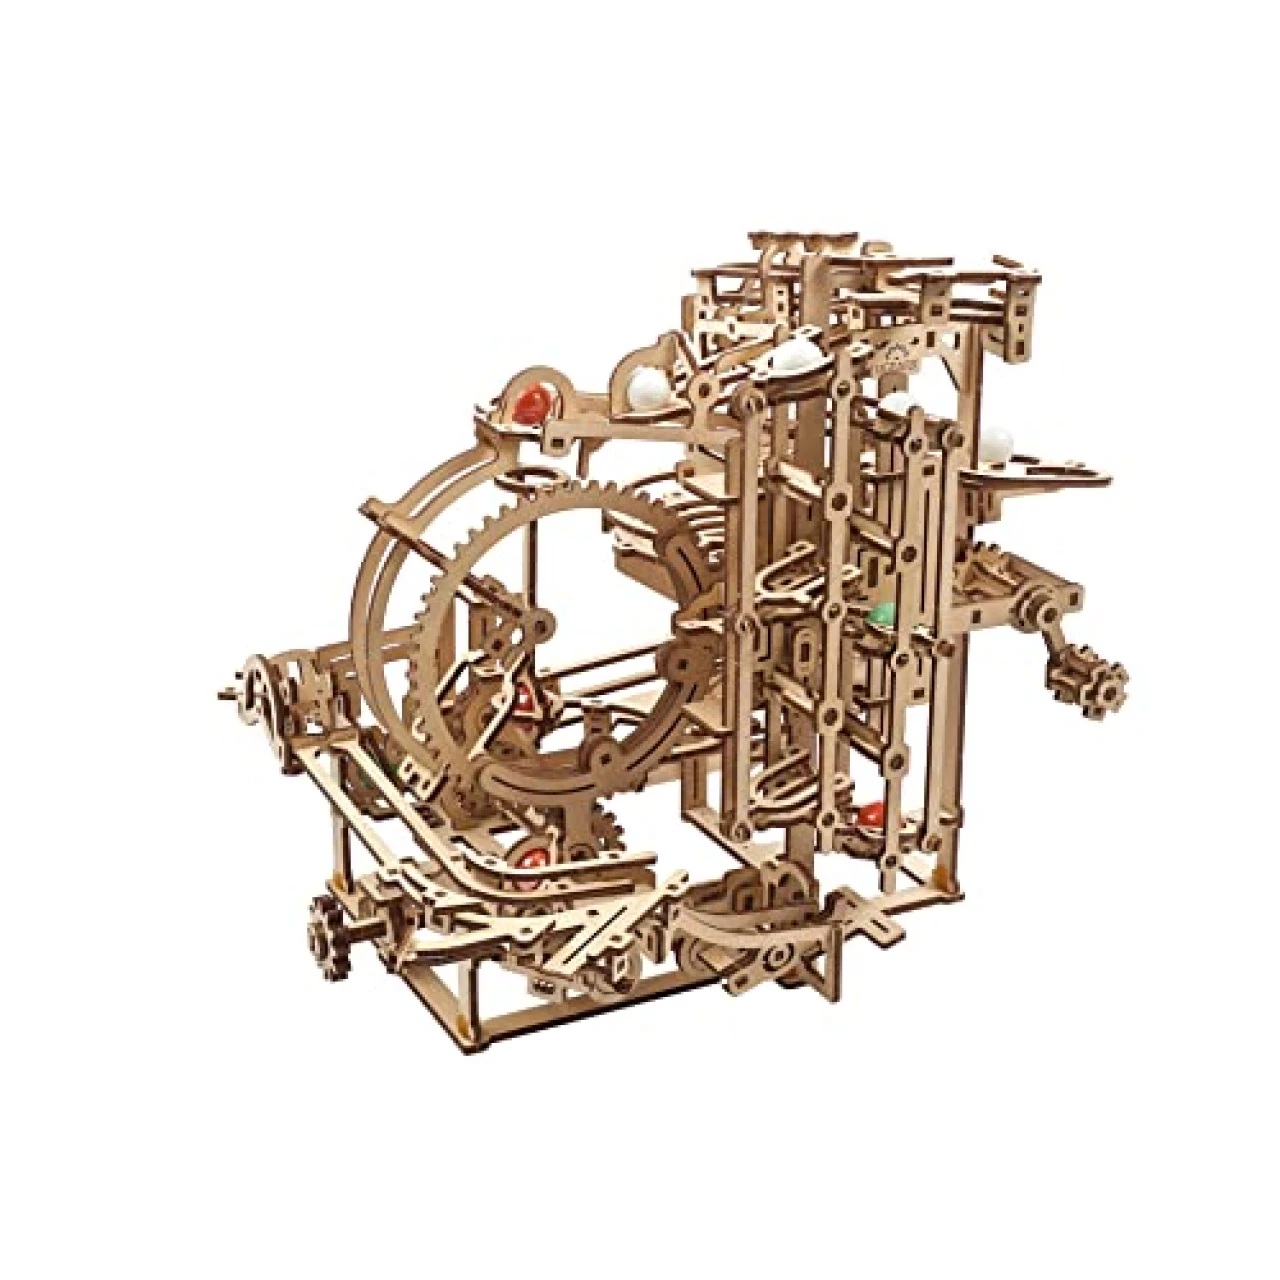 UGEARS Wooden Marble Run Kit - 3D Puzzle Wood Marble Run Stepped Hoist